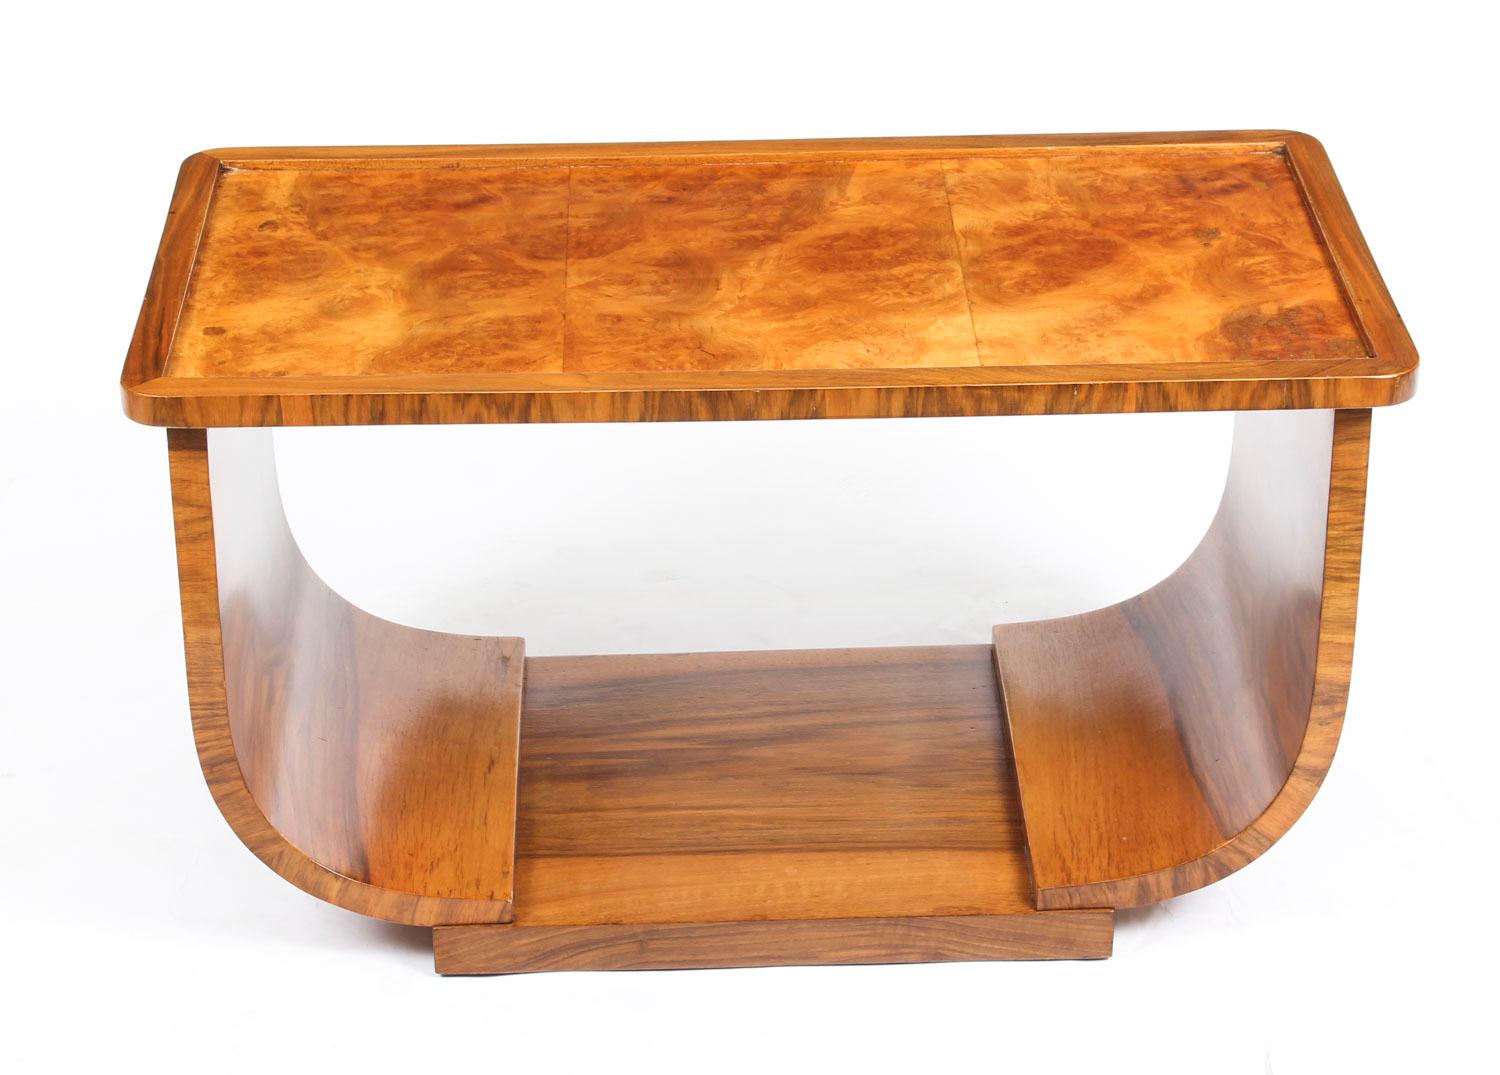 This is a superb antique Art Deco burr walnut coffee table, circa 1920 in date.

The table top is rectangular in shape and features wonderful burr walnut with superb walnut crossbanding. It is raised on a spectacular curved base typical of the